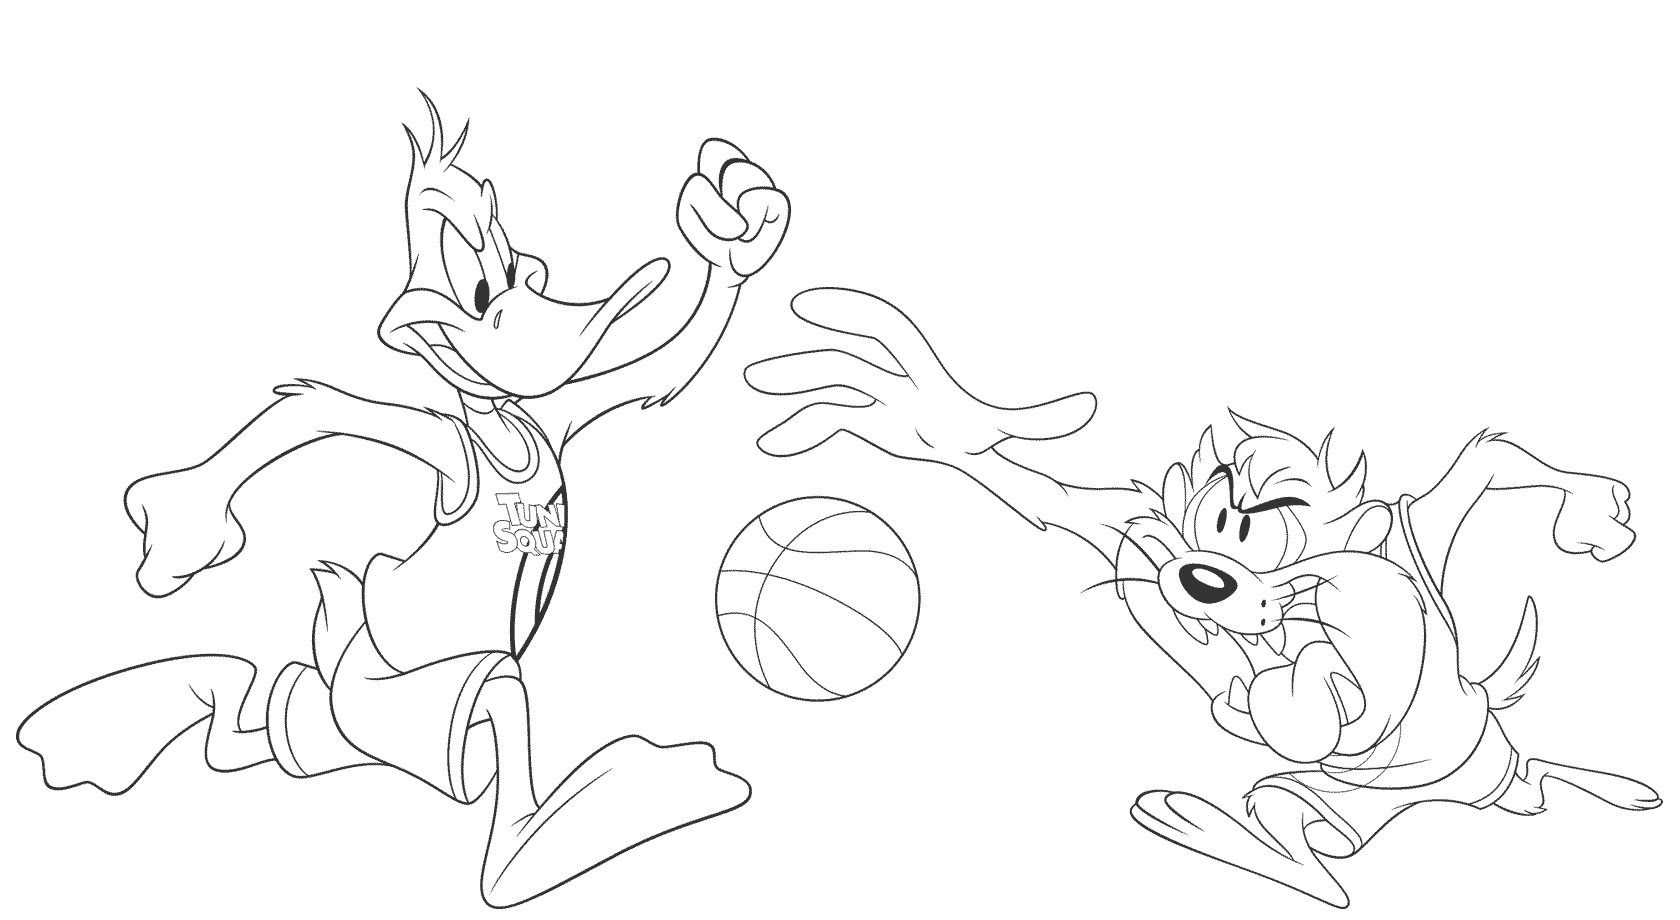 Tune Squad coloring page from Space Jam A New Legacy